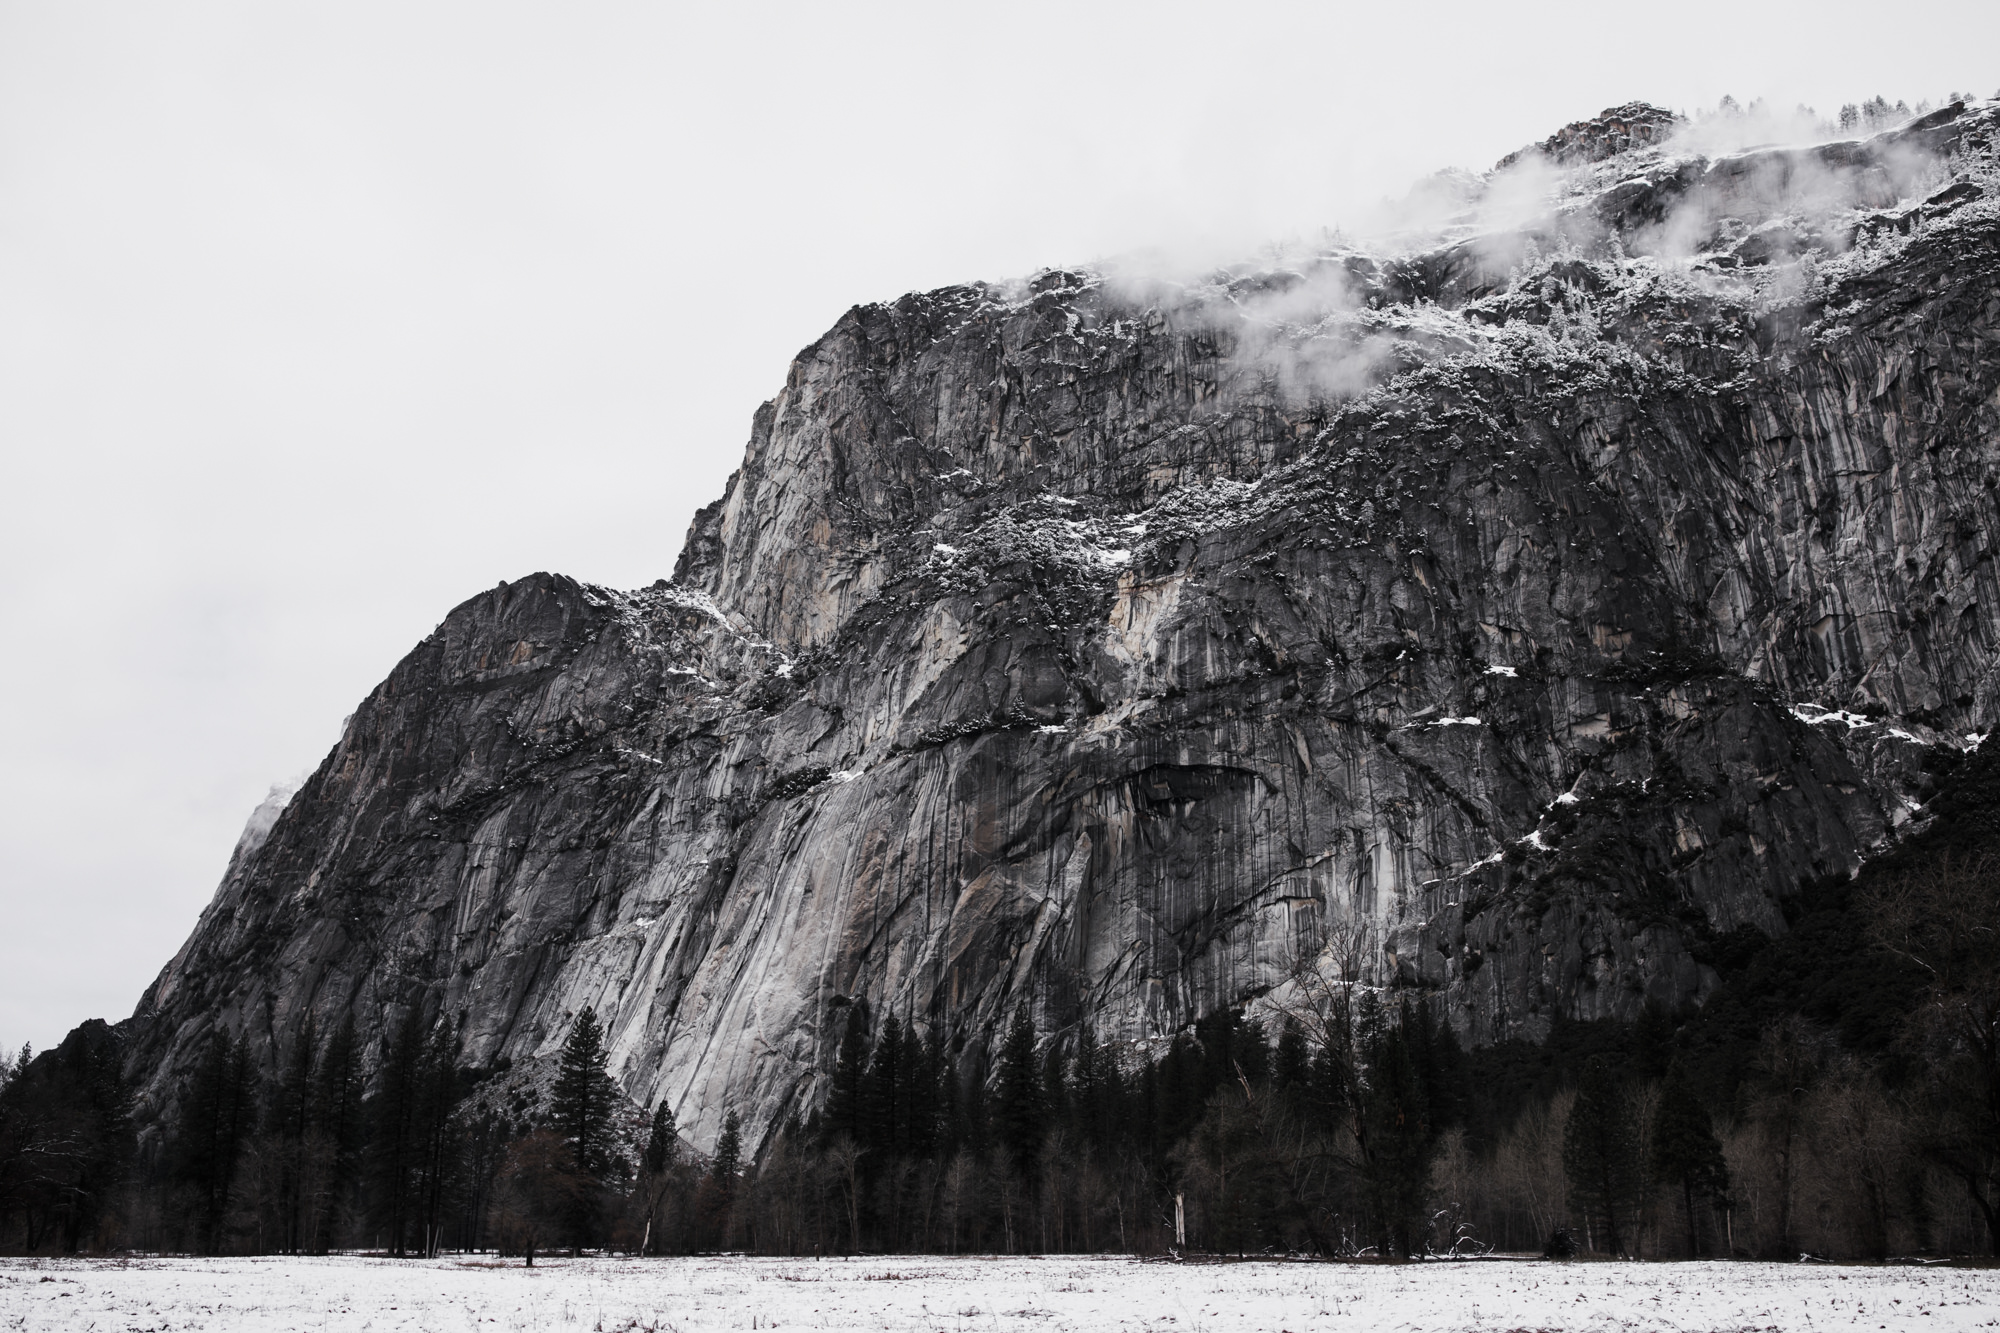 yosemite national park in the winter